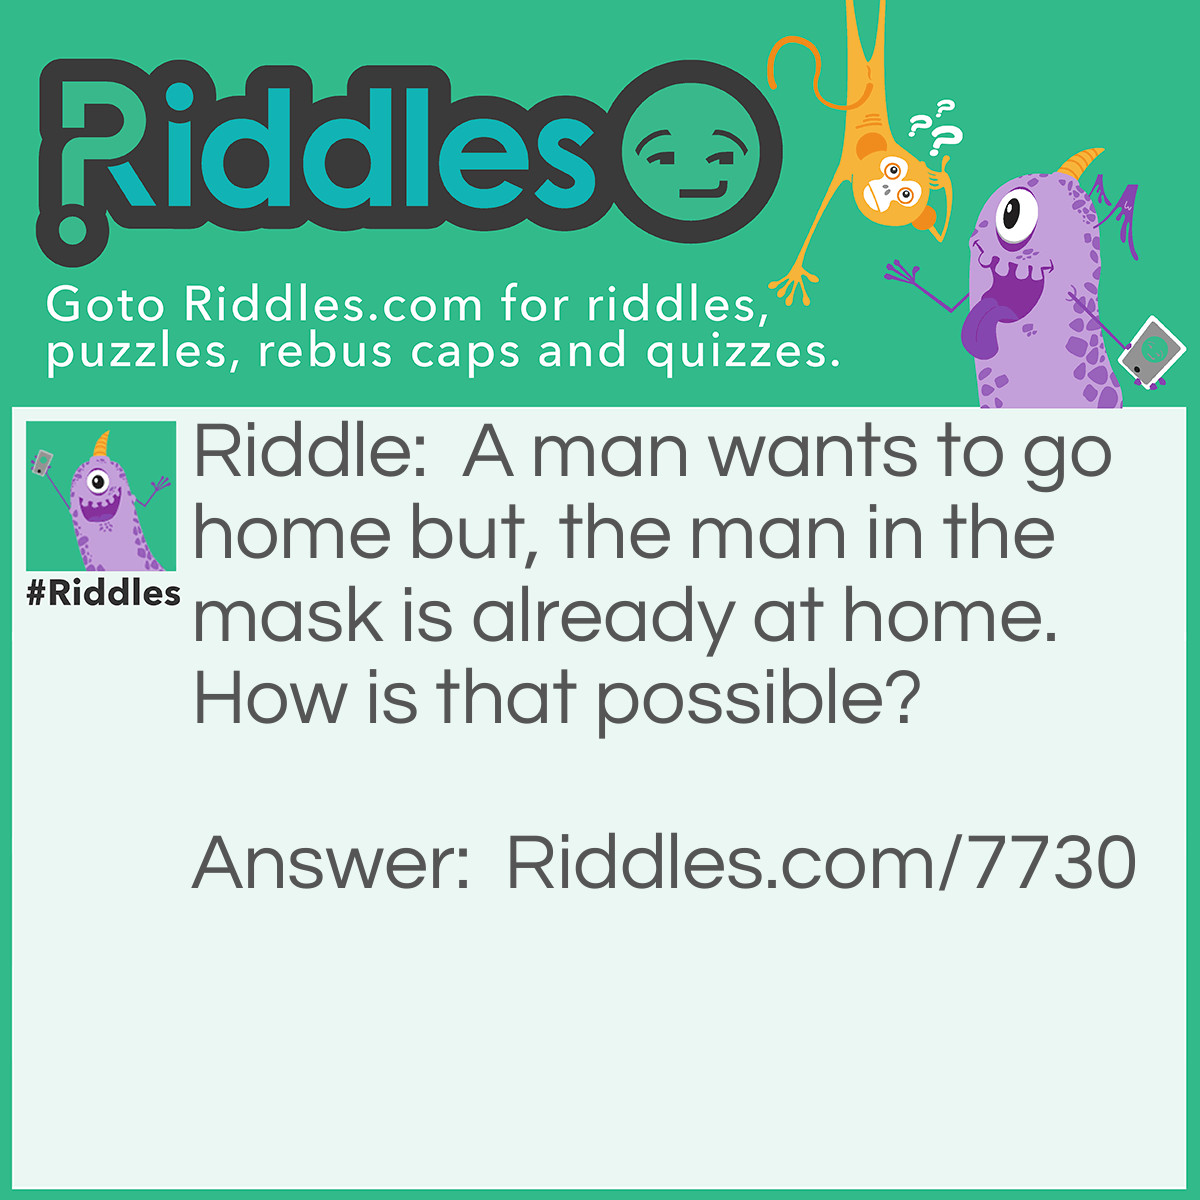 Riddle: A man wants to go home but, the man in the mask is already at home. How is that possible? Answer: The man is watching himself playing baseball and wanting to go home while he was doing so.